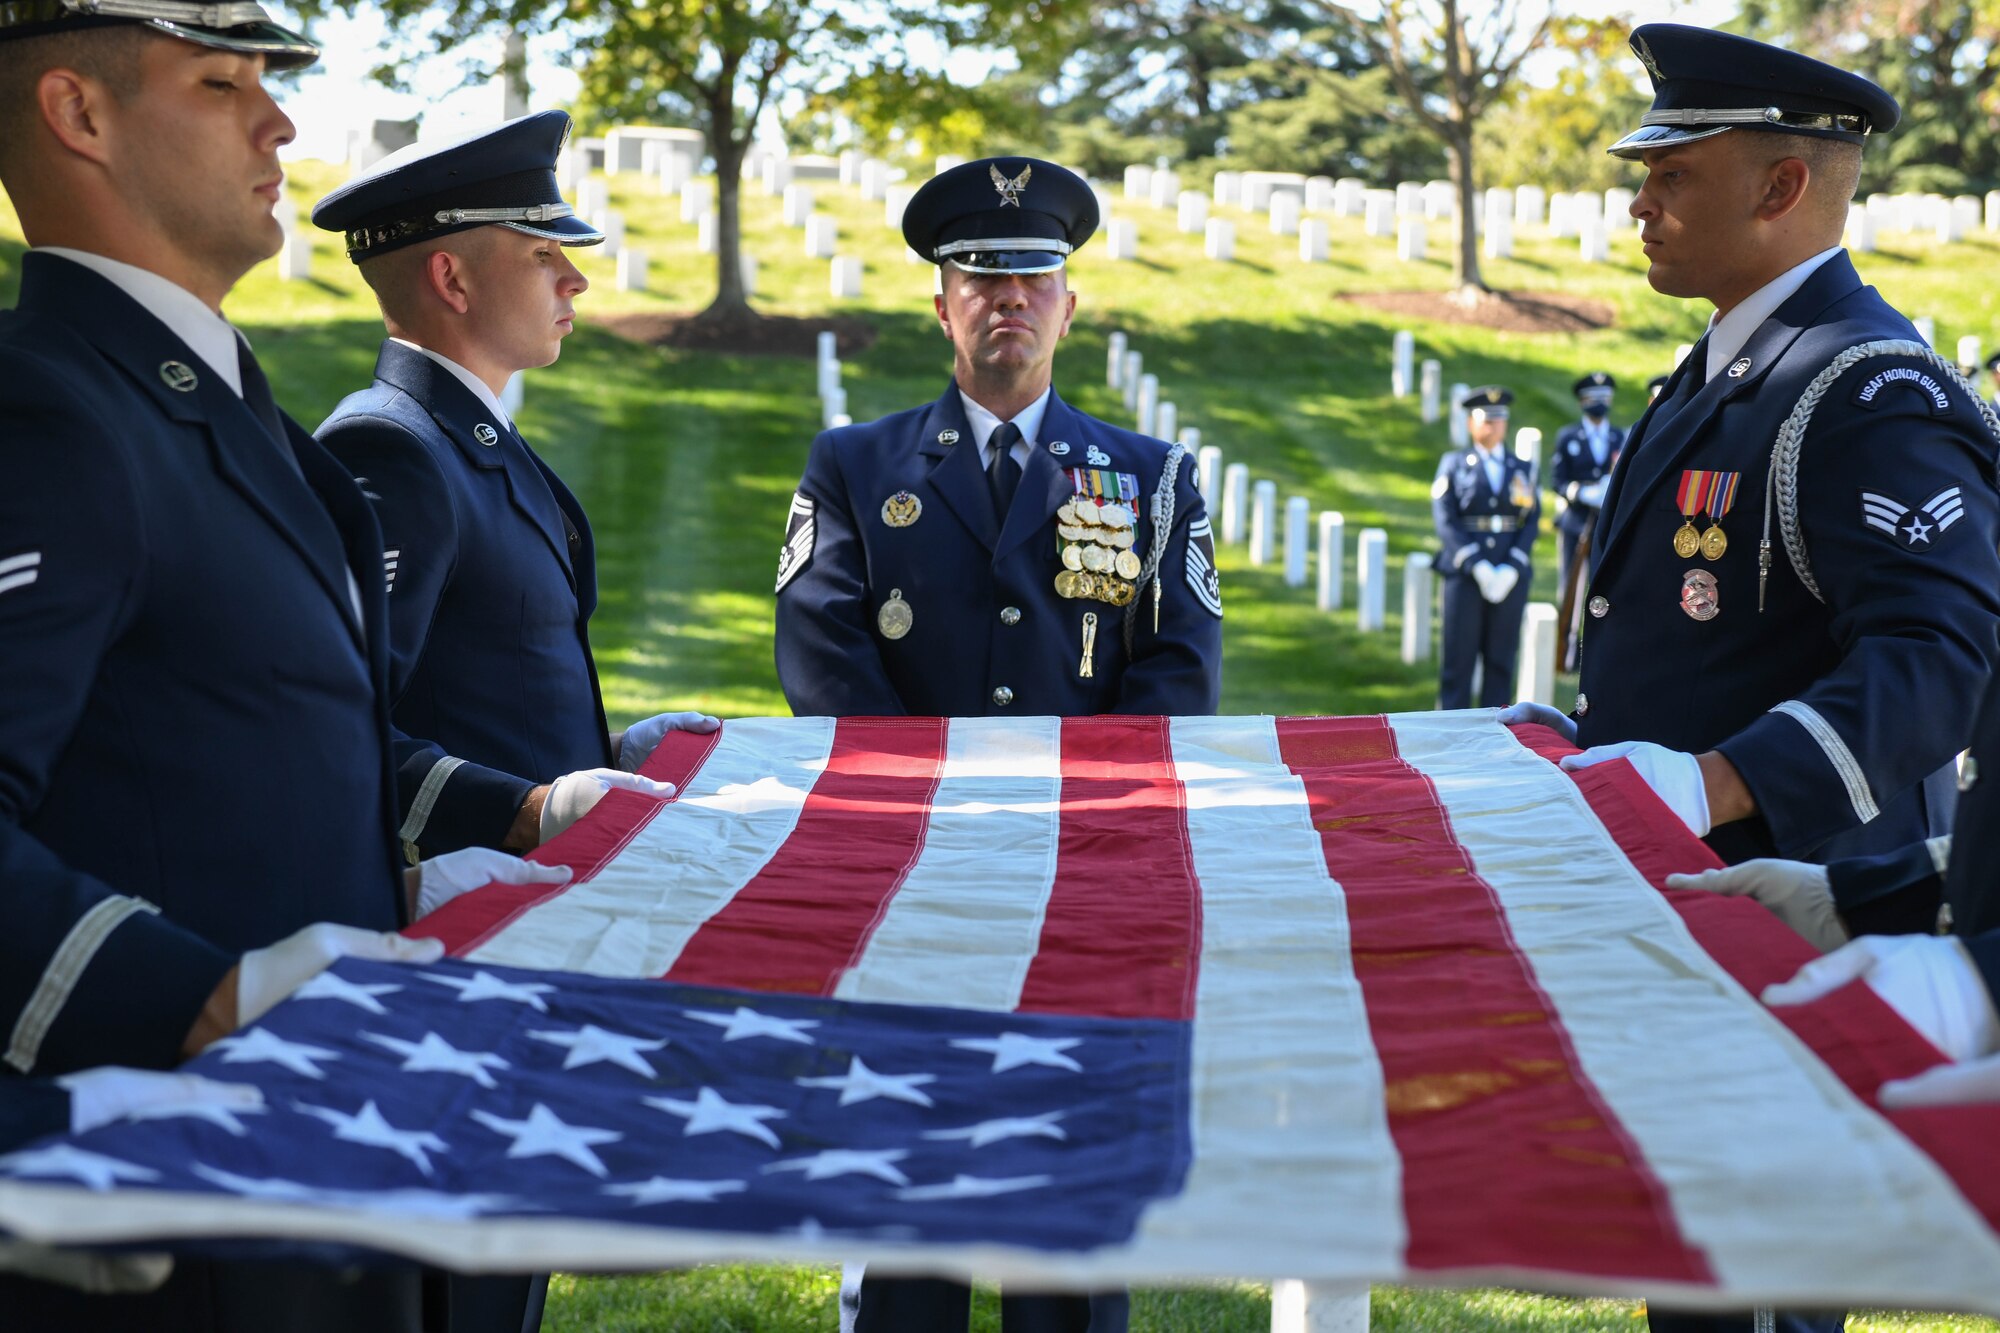 Seventy years after the disappearance of a C-124 Globlemaster II over the Atlantic Ocean, members of the 509th Bomb Wing honored, U.S. Lt. Col. James I. Hopkins, during a memorial ceremony at Arlington National Cemetery.